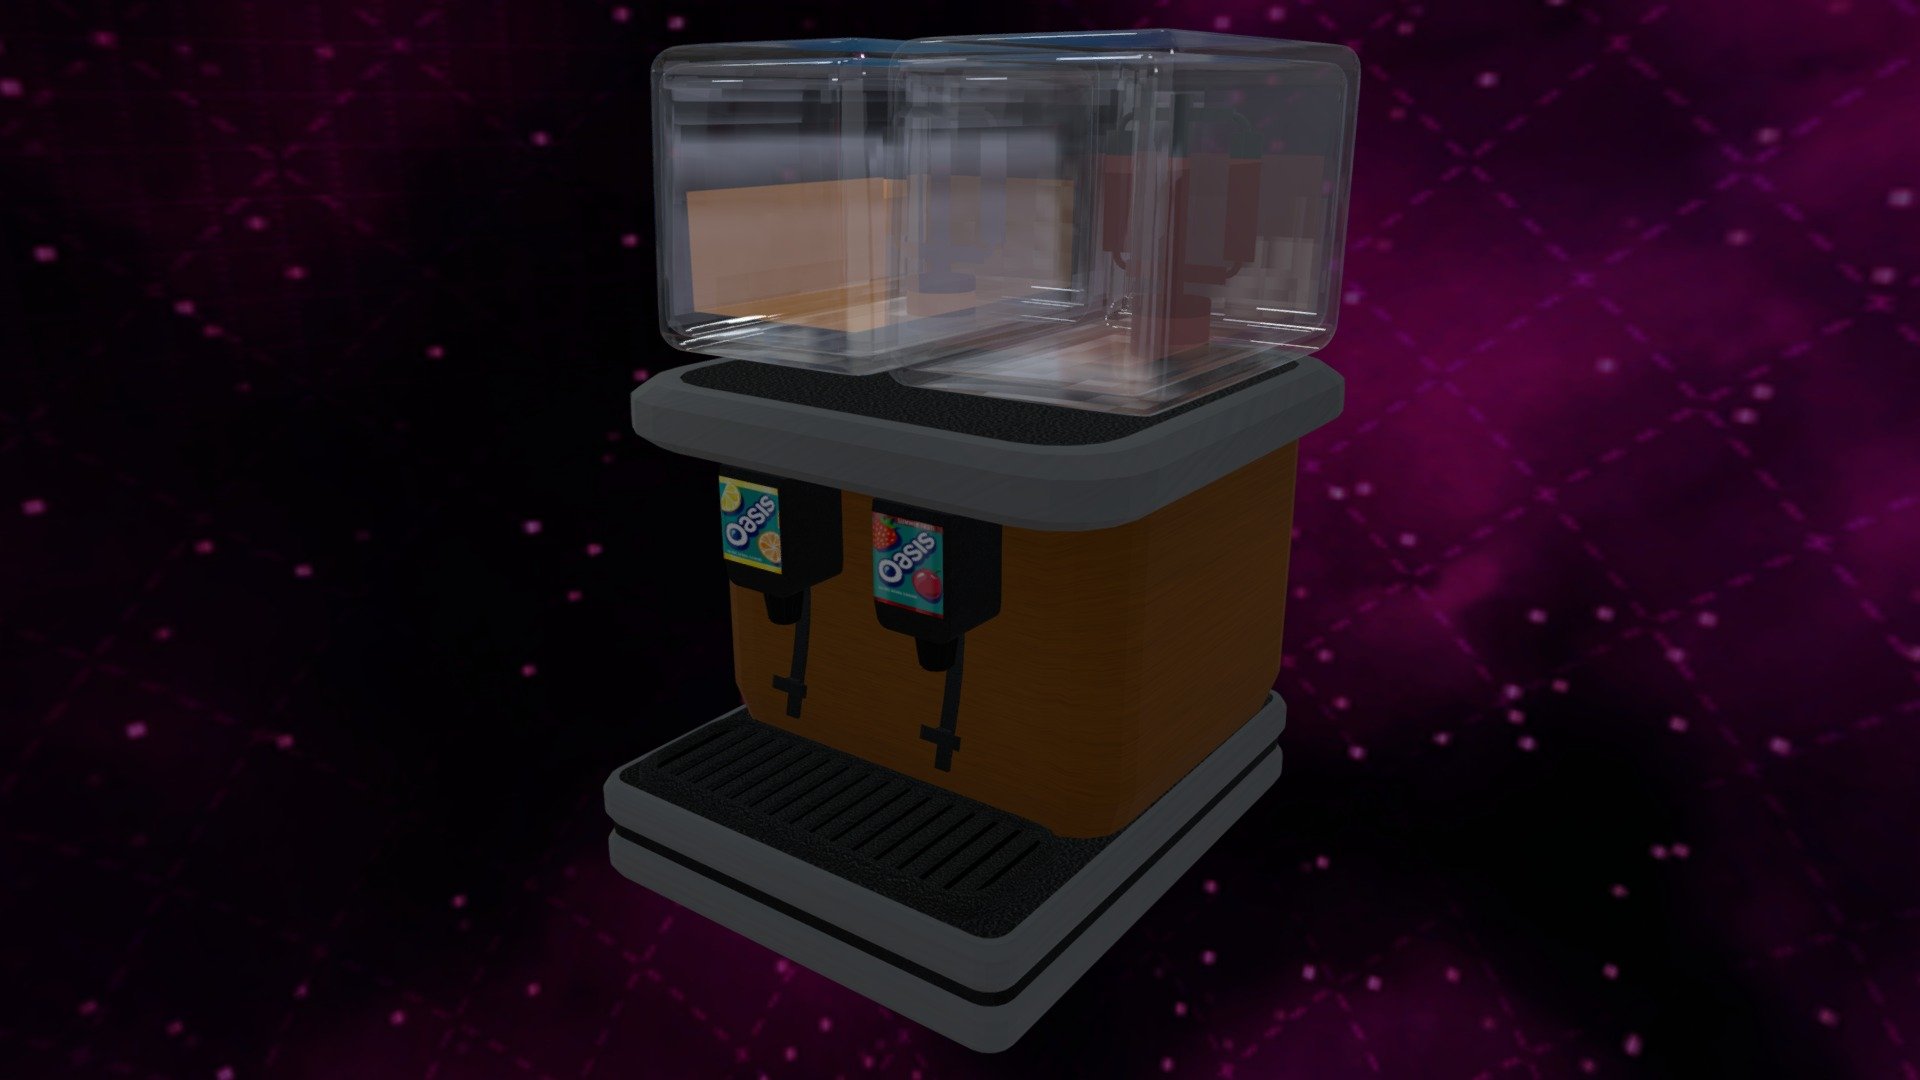 Introducing the Soft Drink Dispenser made by ACBRadio, the programs used to make this object are as follows: Blender 2.92.0 &amp; G.I.M.P 2.10.4…The ‘Textures’ inclued in this object are the following: Deffuse x3…Free of Charge

Note: This object wil be updated soon

360 backdrop’s total poly count: Triangles: 4k Vertices: 2k 

Soft Drink Dispenser: Triangles: 42.3k Vertices: 21.4k

:D - Soft Drink Dispenser .Blend (v0.9) FREE - Download Free 3D model by LordSamueliSolo (@LadyLionStudios) 3d model